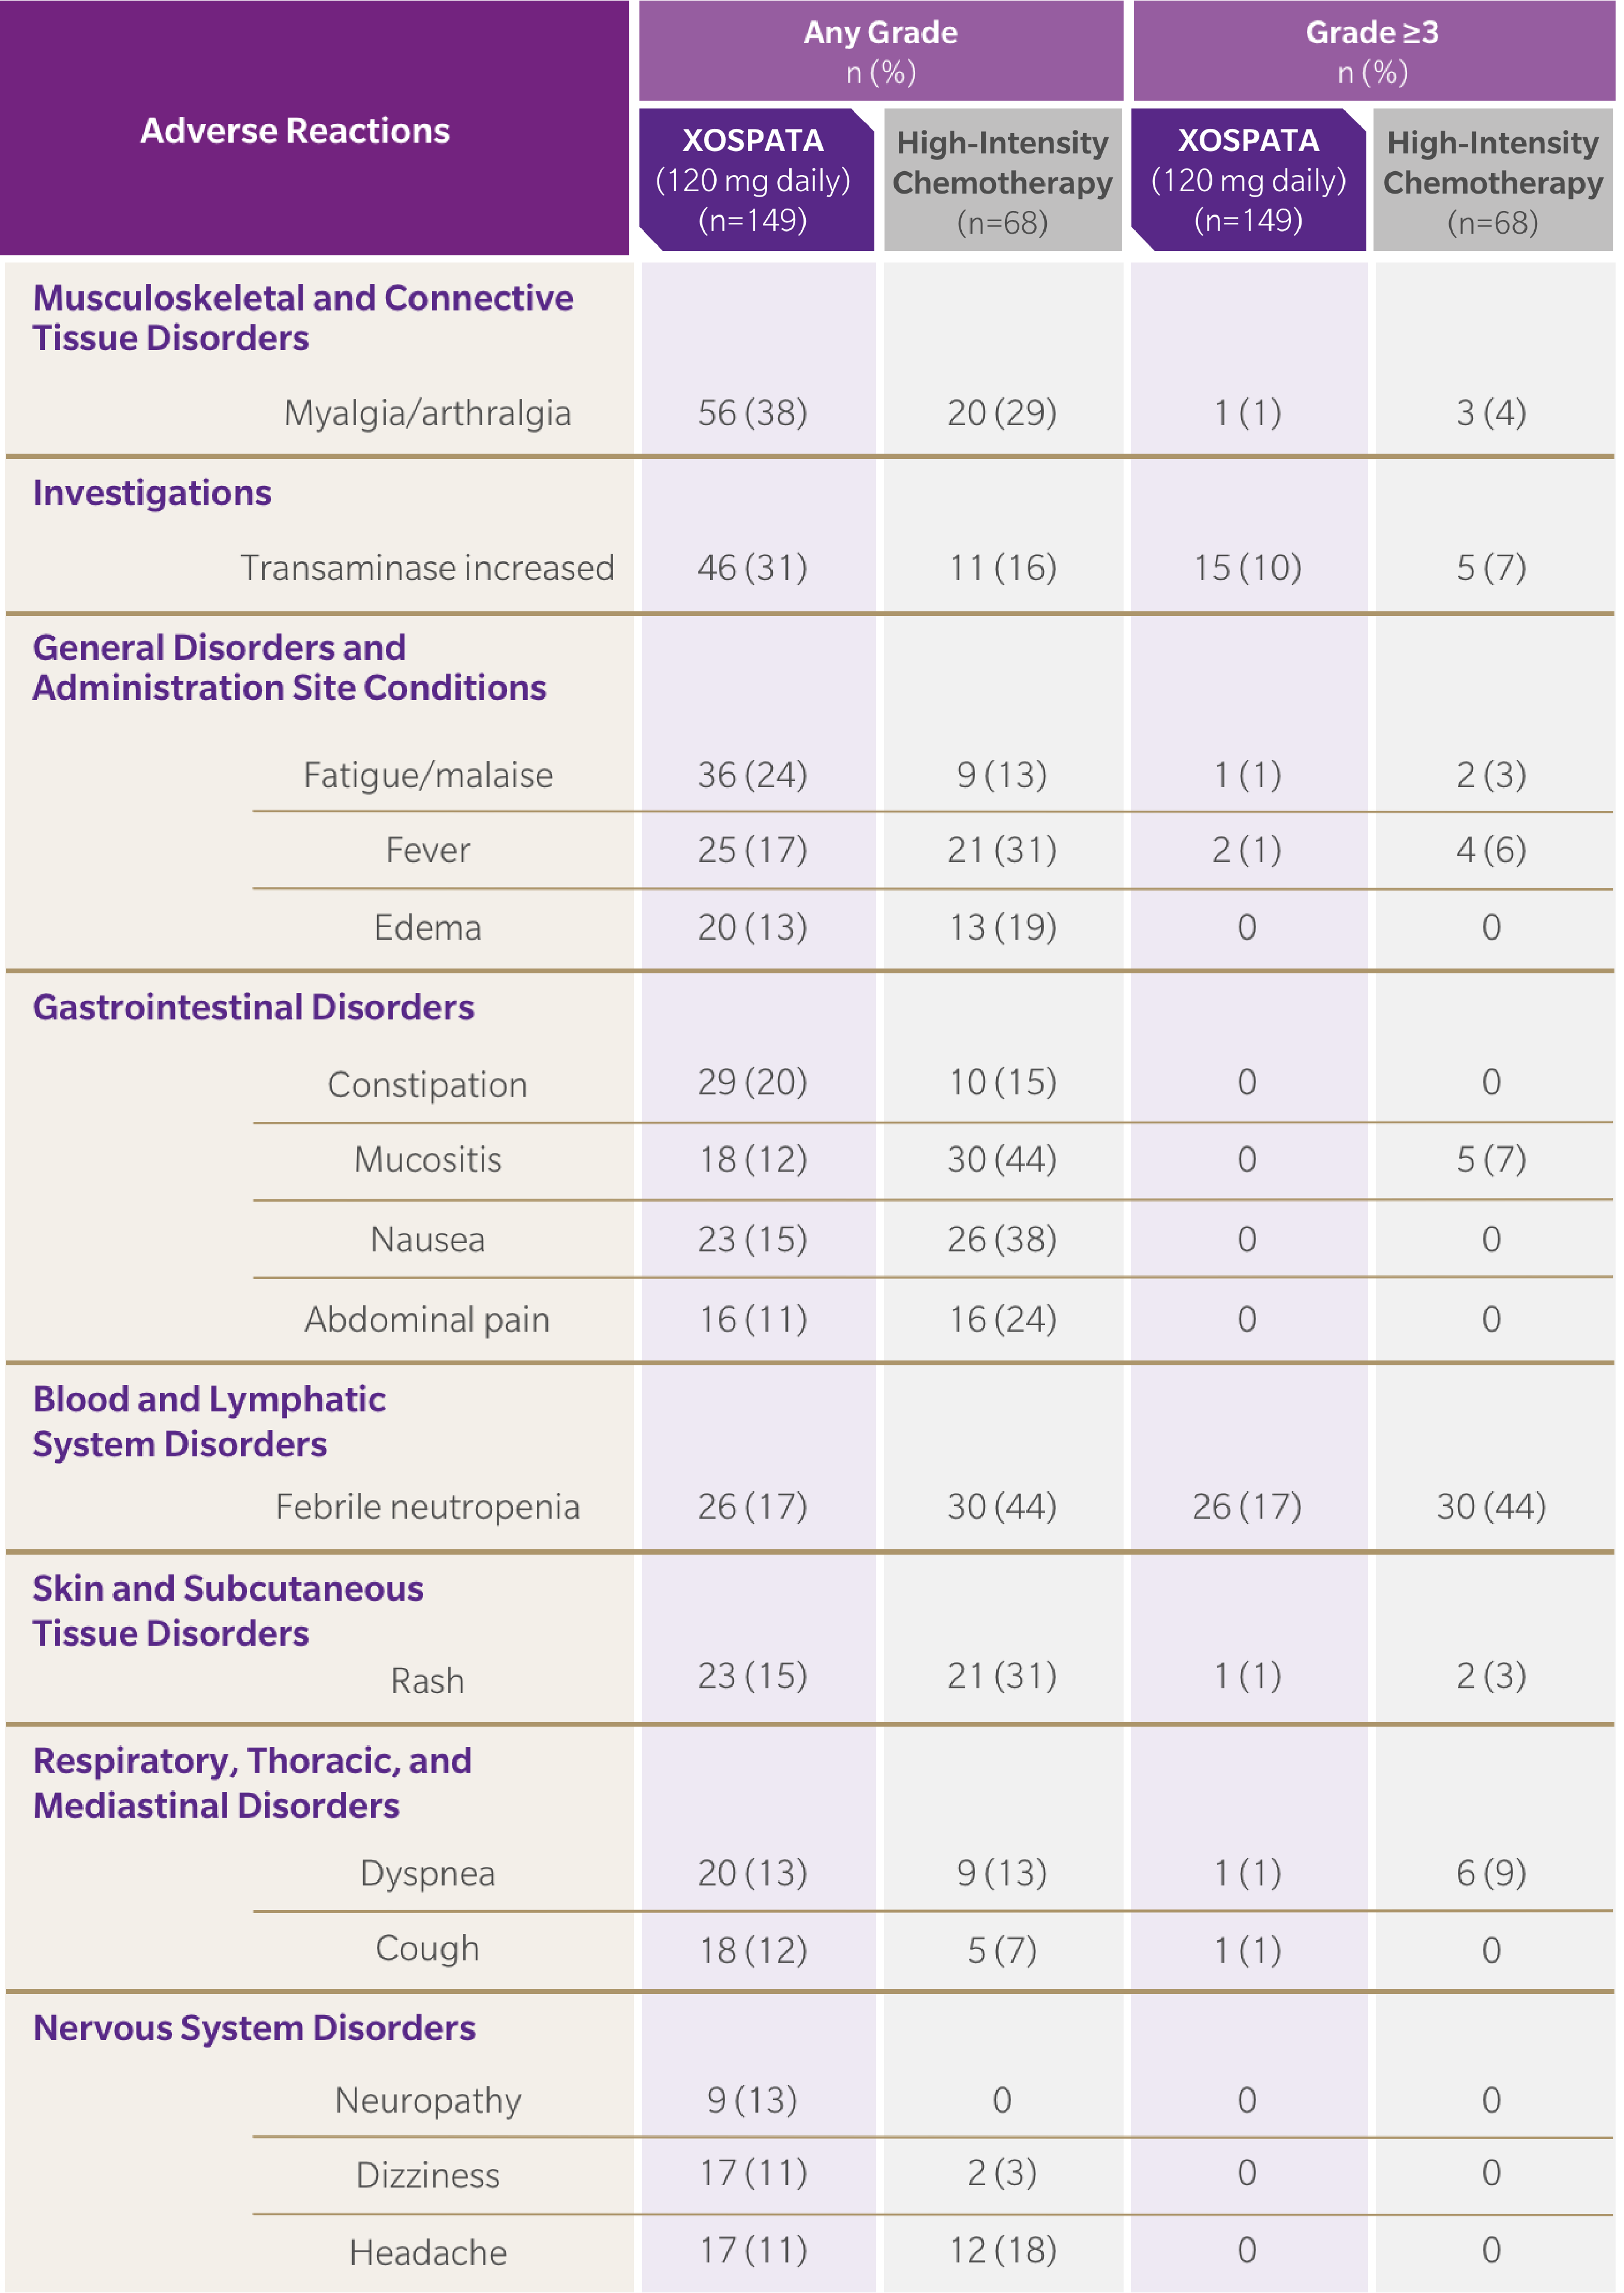 Table of adverse reactions reported in the high-intensity chemotherapy subgroup in the ADMIRAL trial.